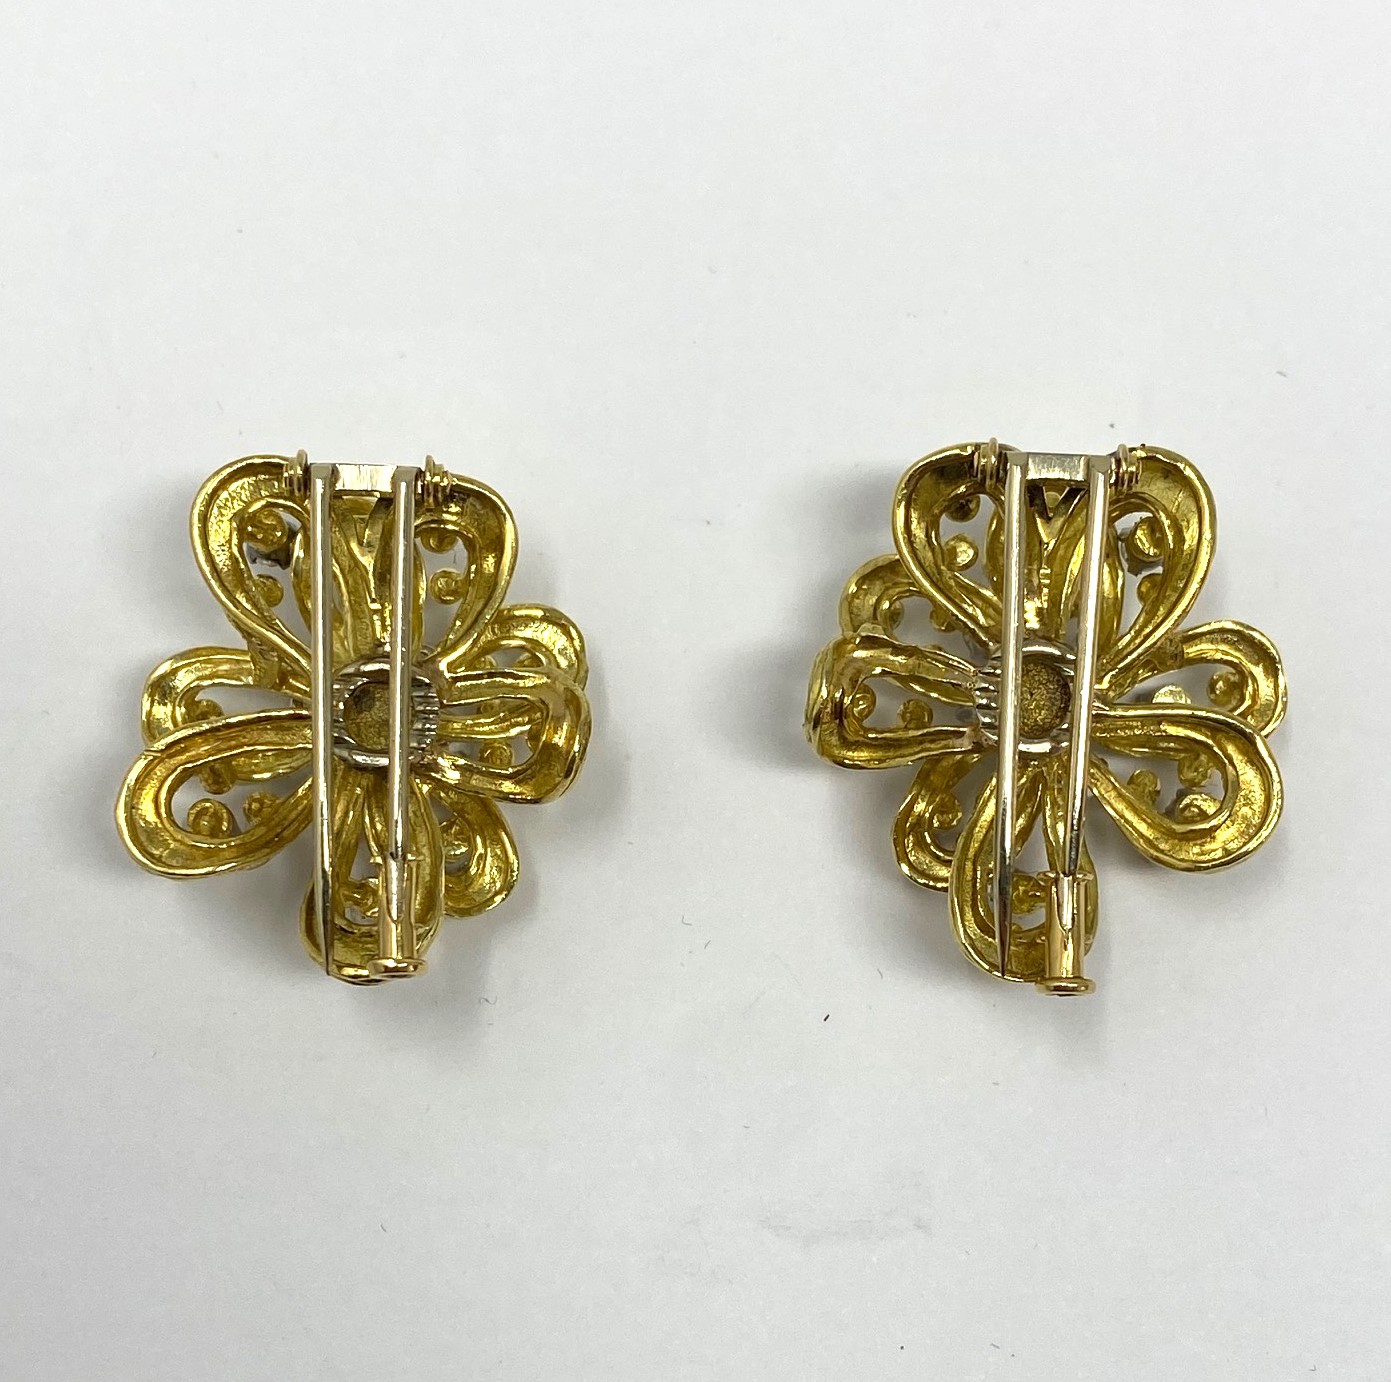 PAIR OF DIAMOND BROOCH CLIPS, 1960s - Image 3 of 3